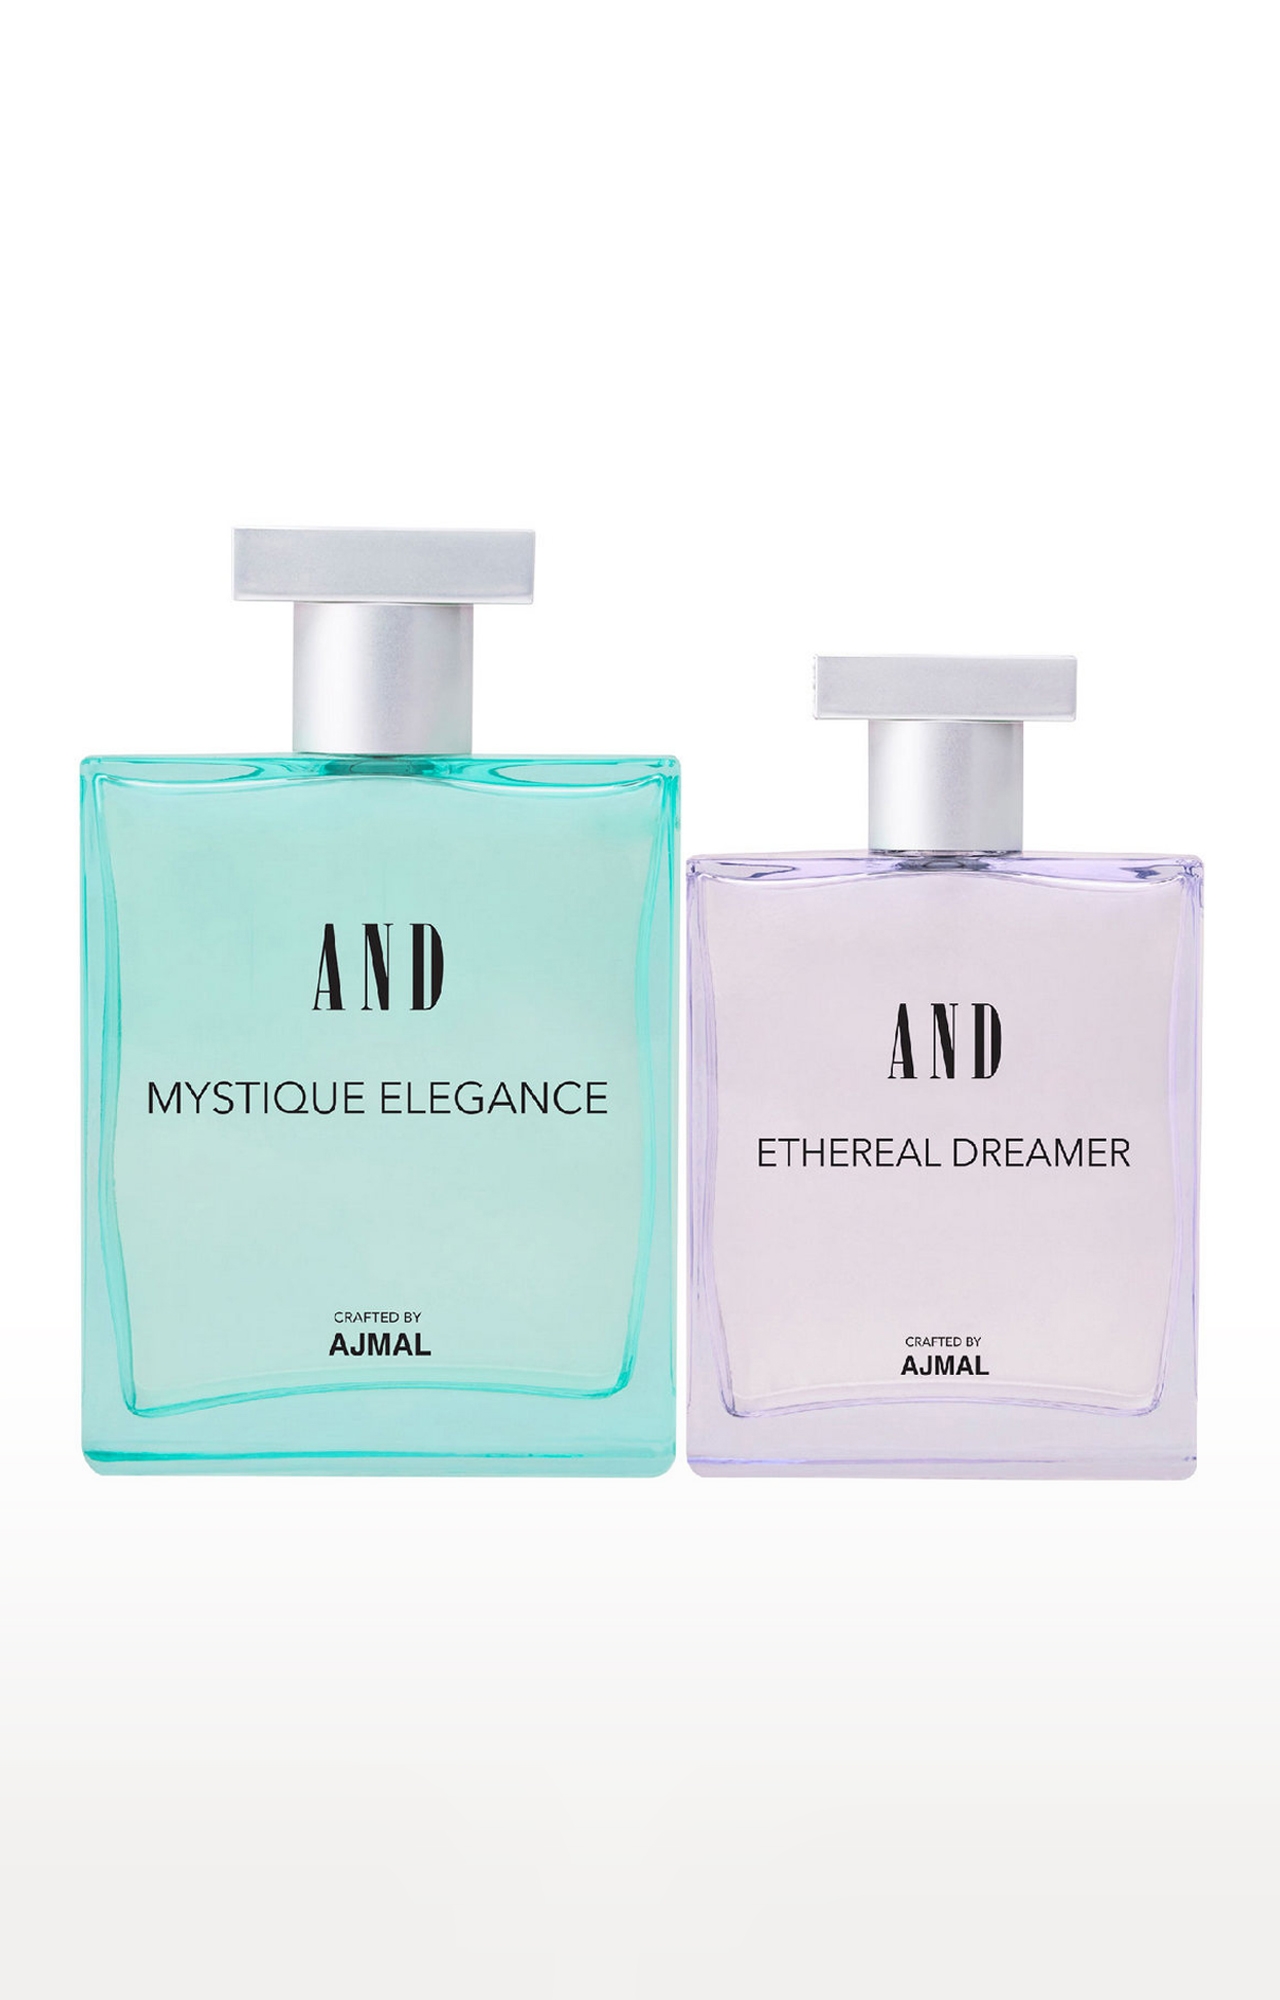 AND Mystique Elegance & Ethereal Dreamer Pack of 2 Eau De Parfum 100ML each for Women Crafted by Ajmal 